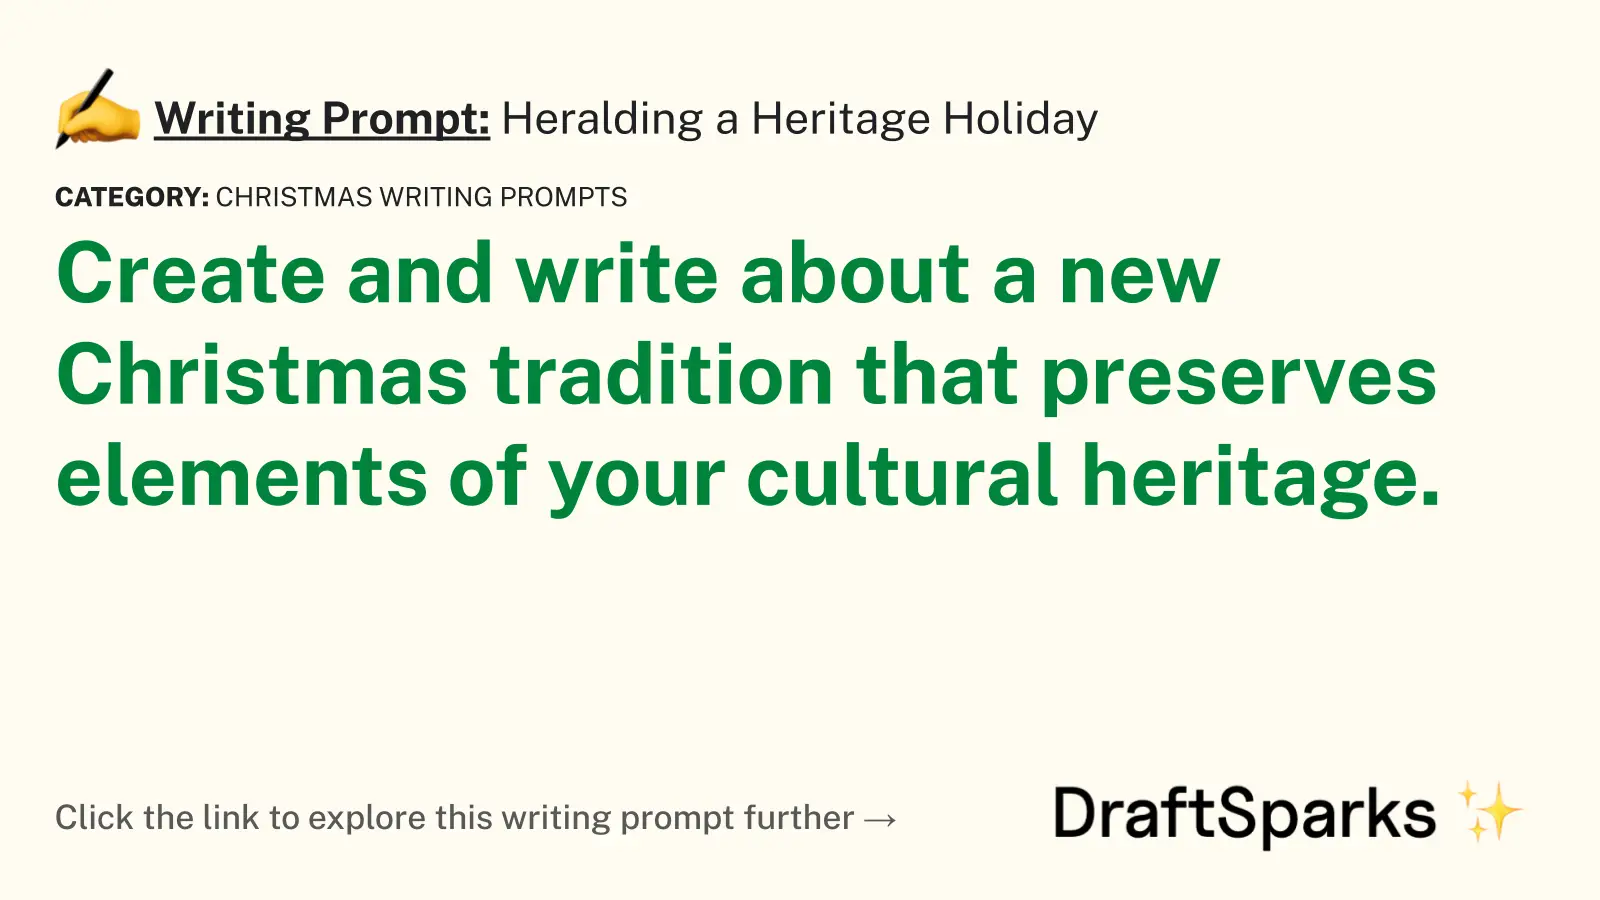 Heralding a Heritage Holiday